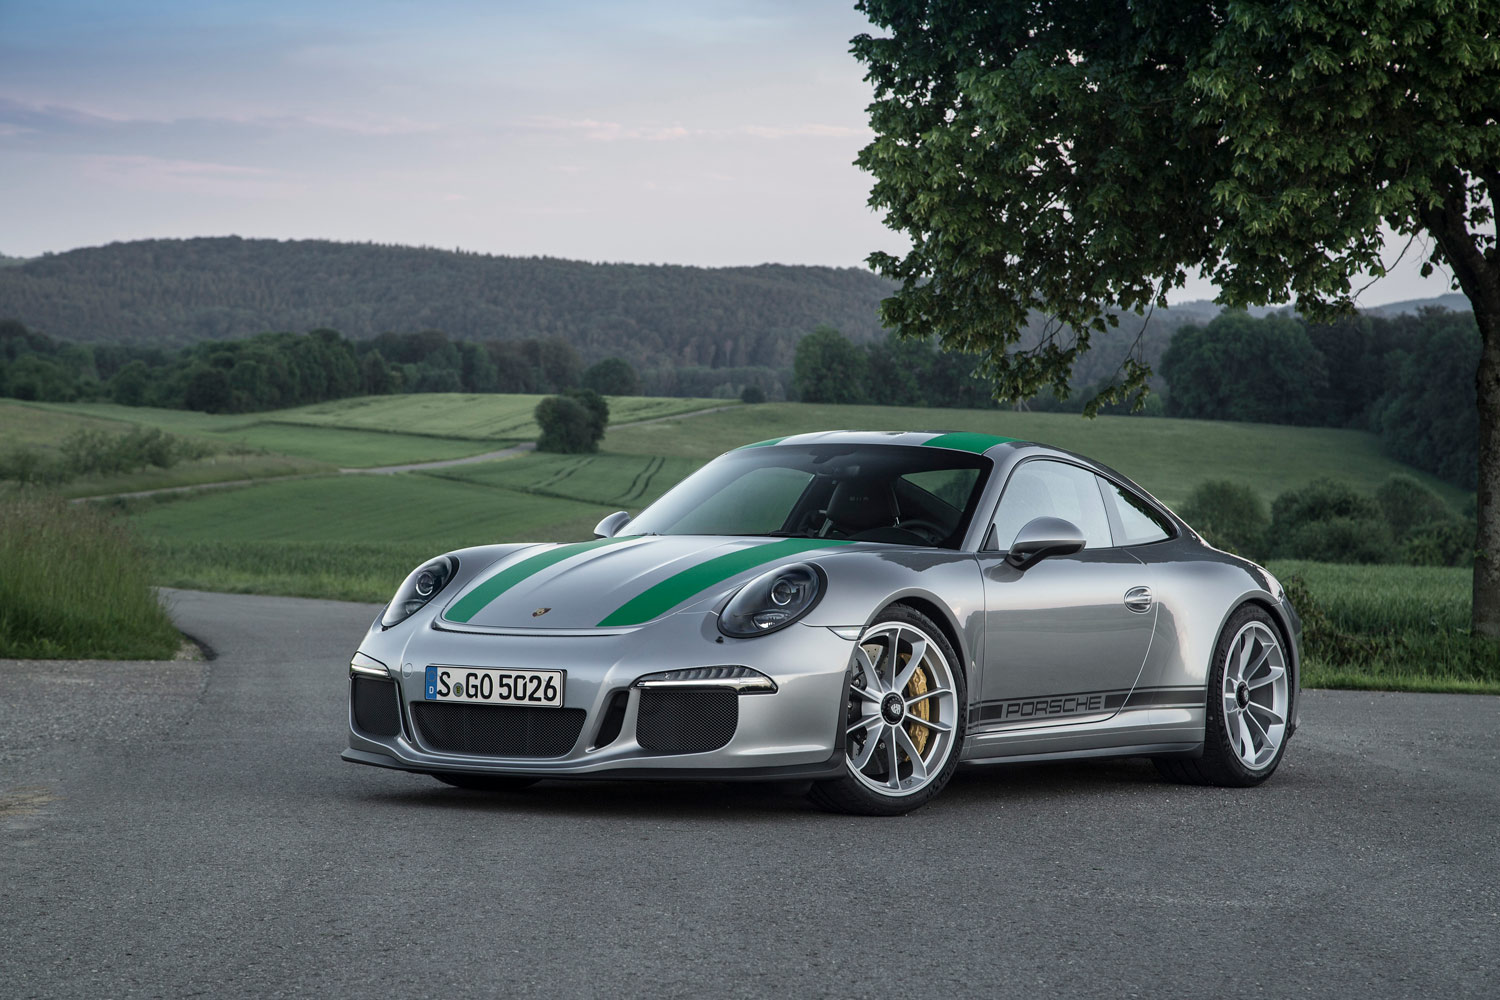 2016 Porsche 911 R in silver parked on a country roadway